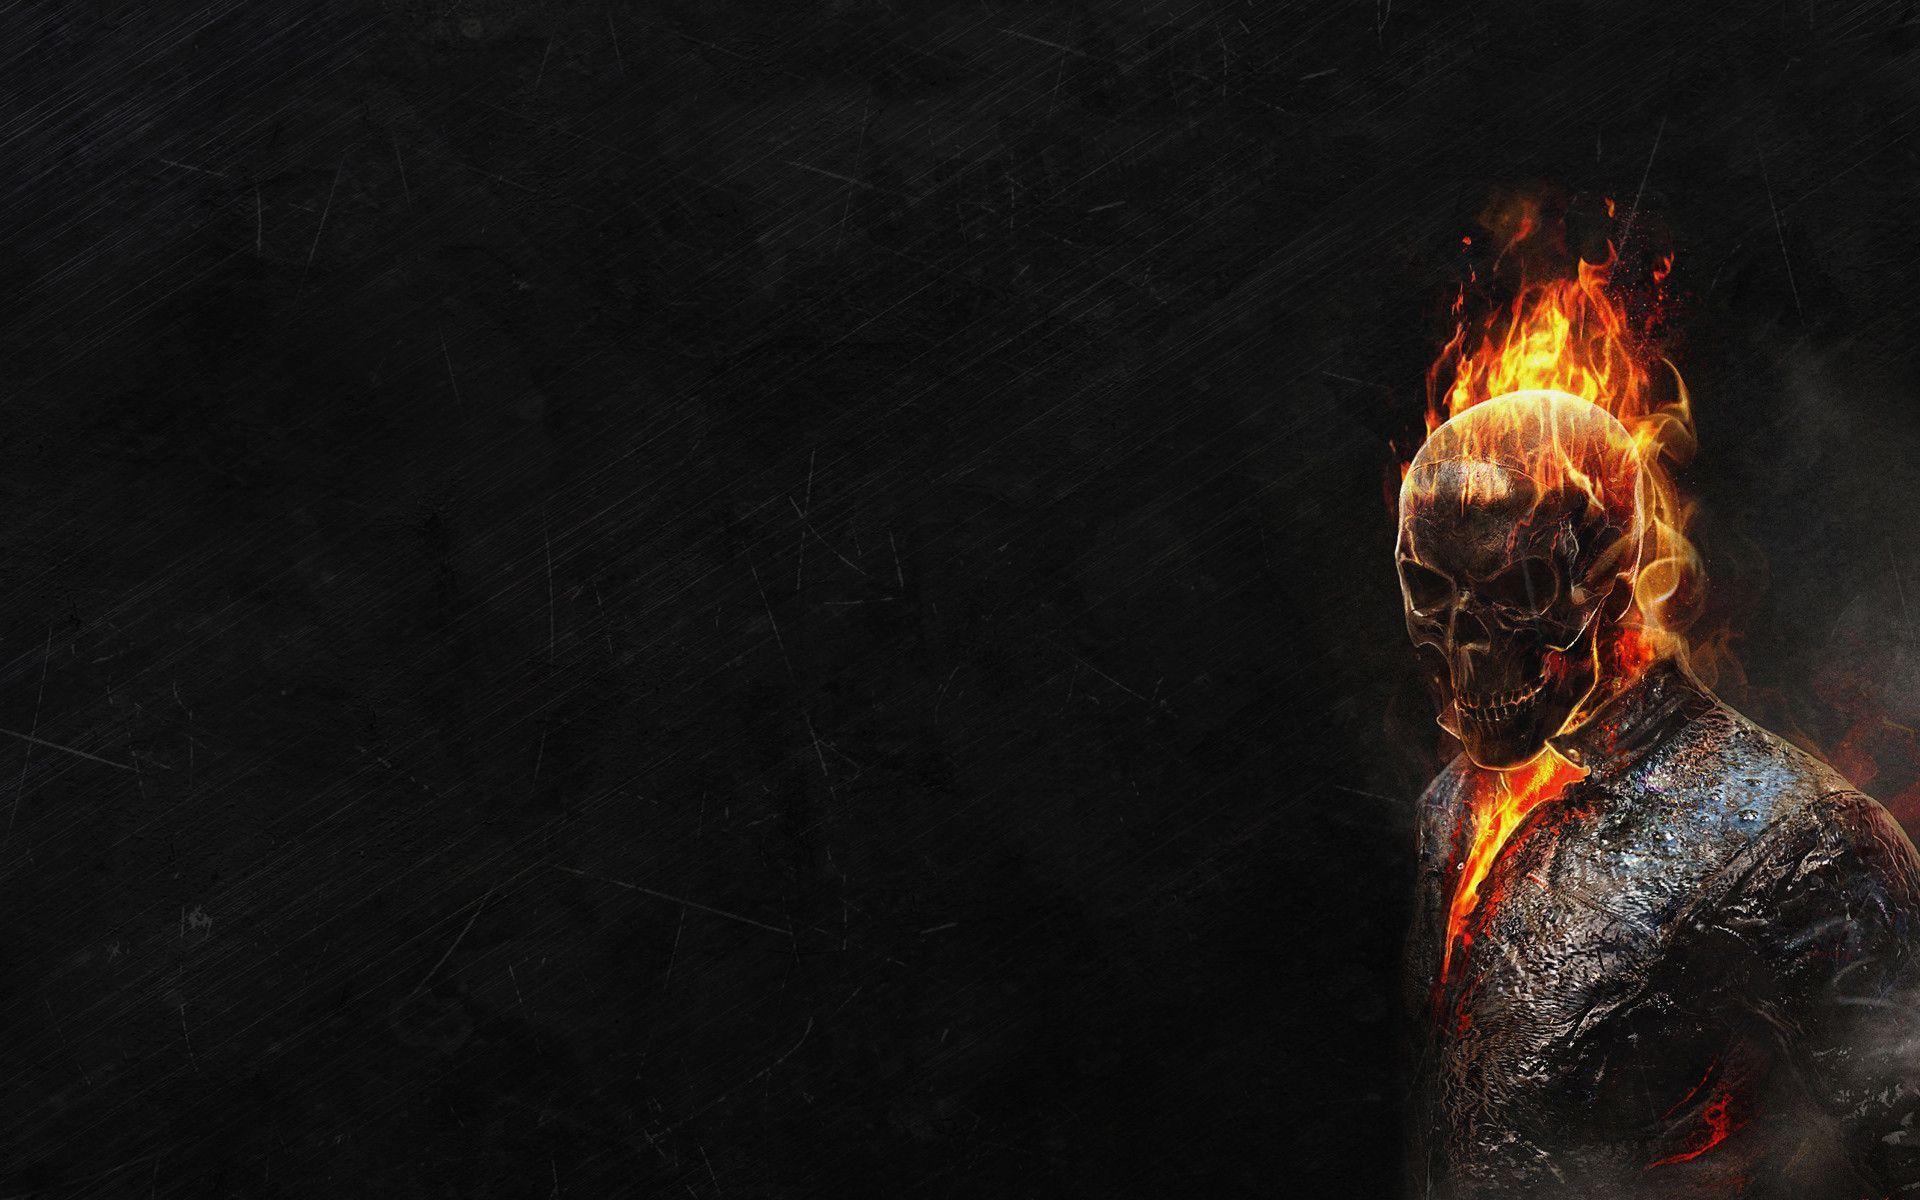 ghost rider wallpaper Search Engine